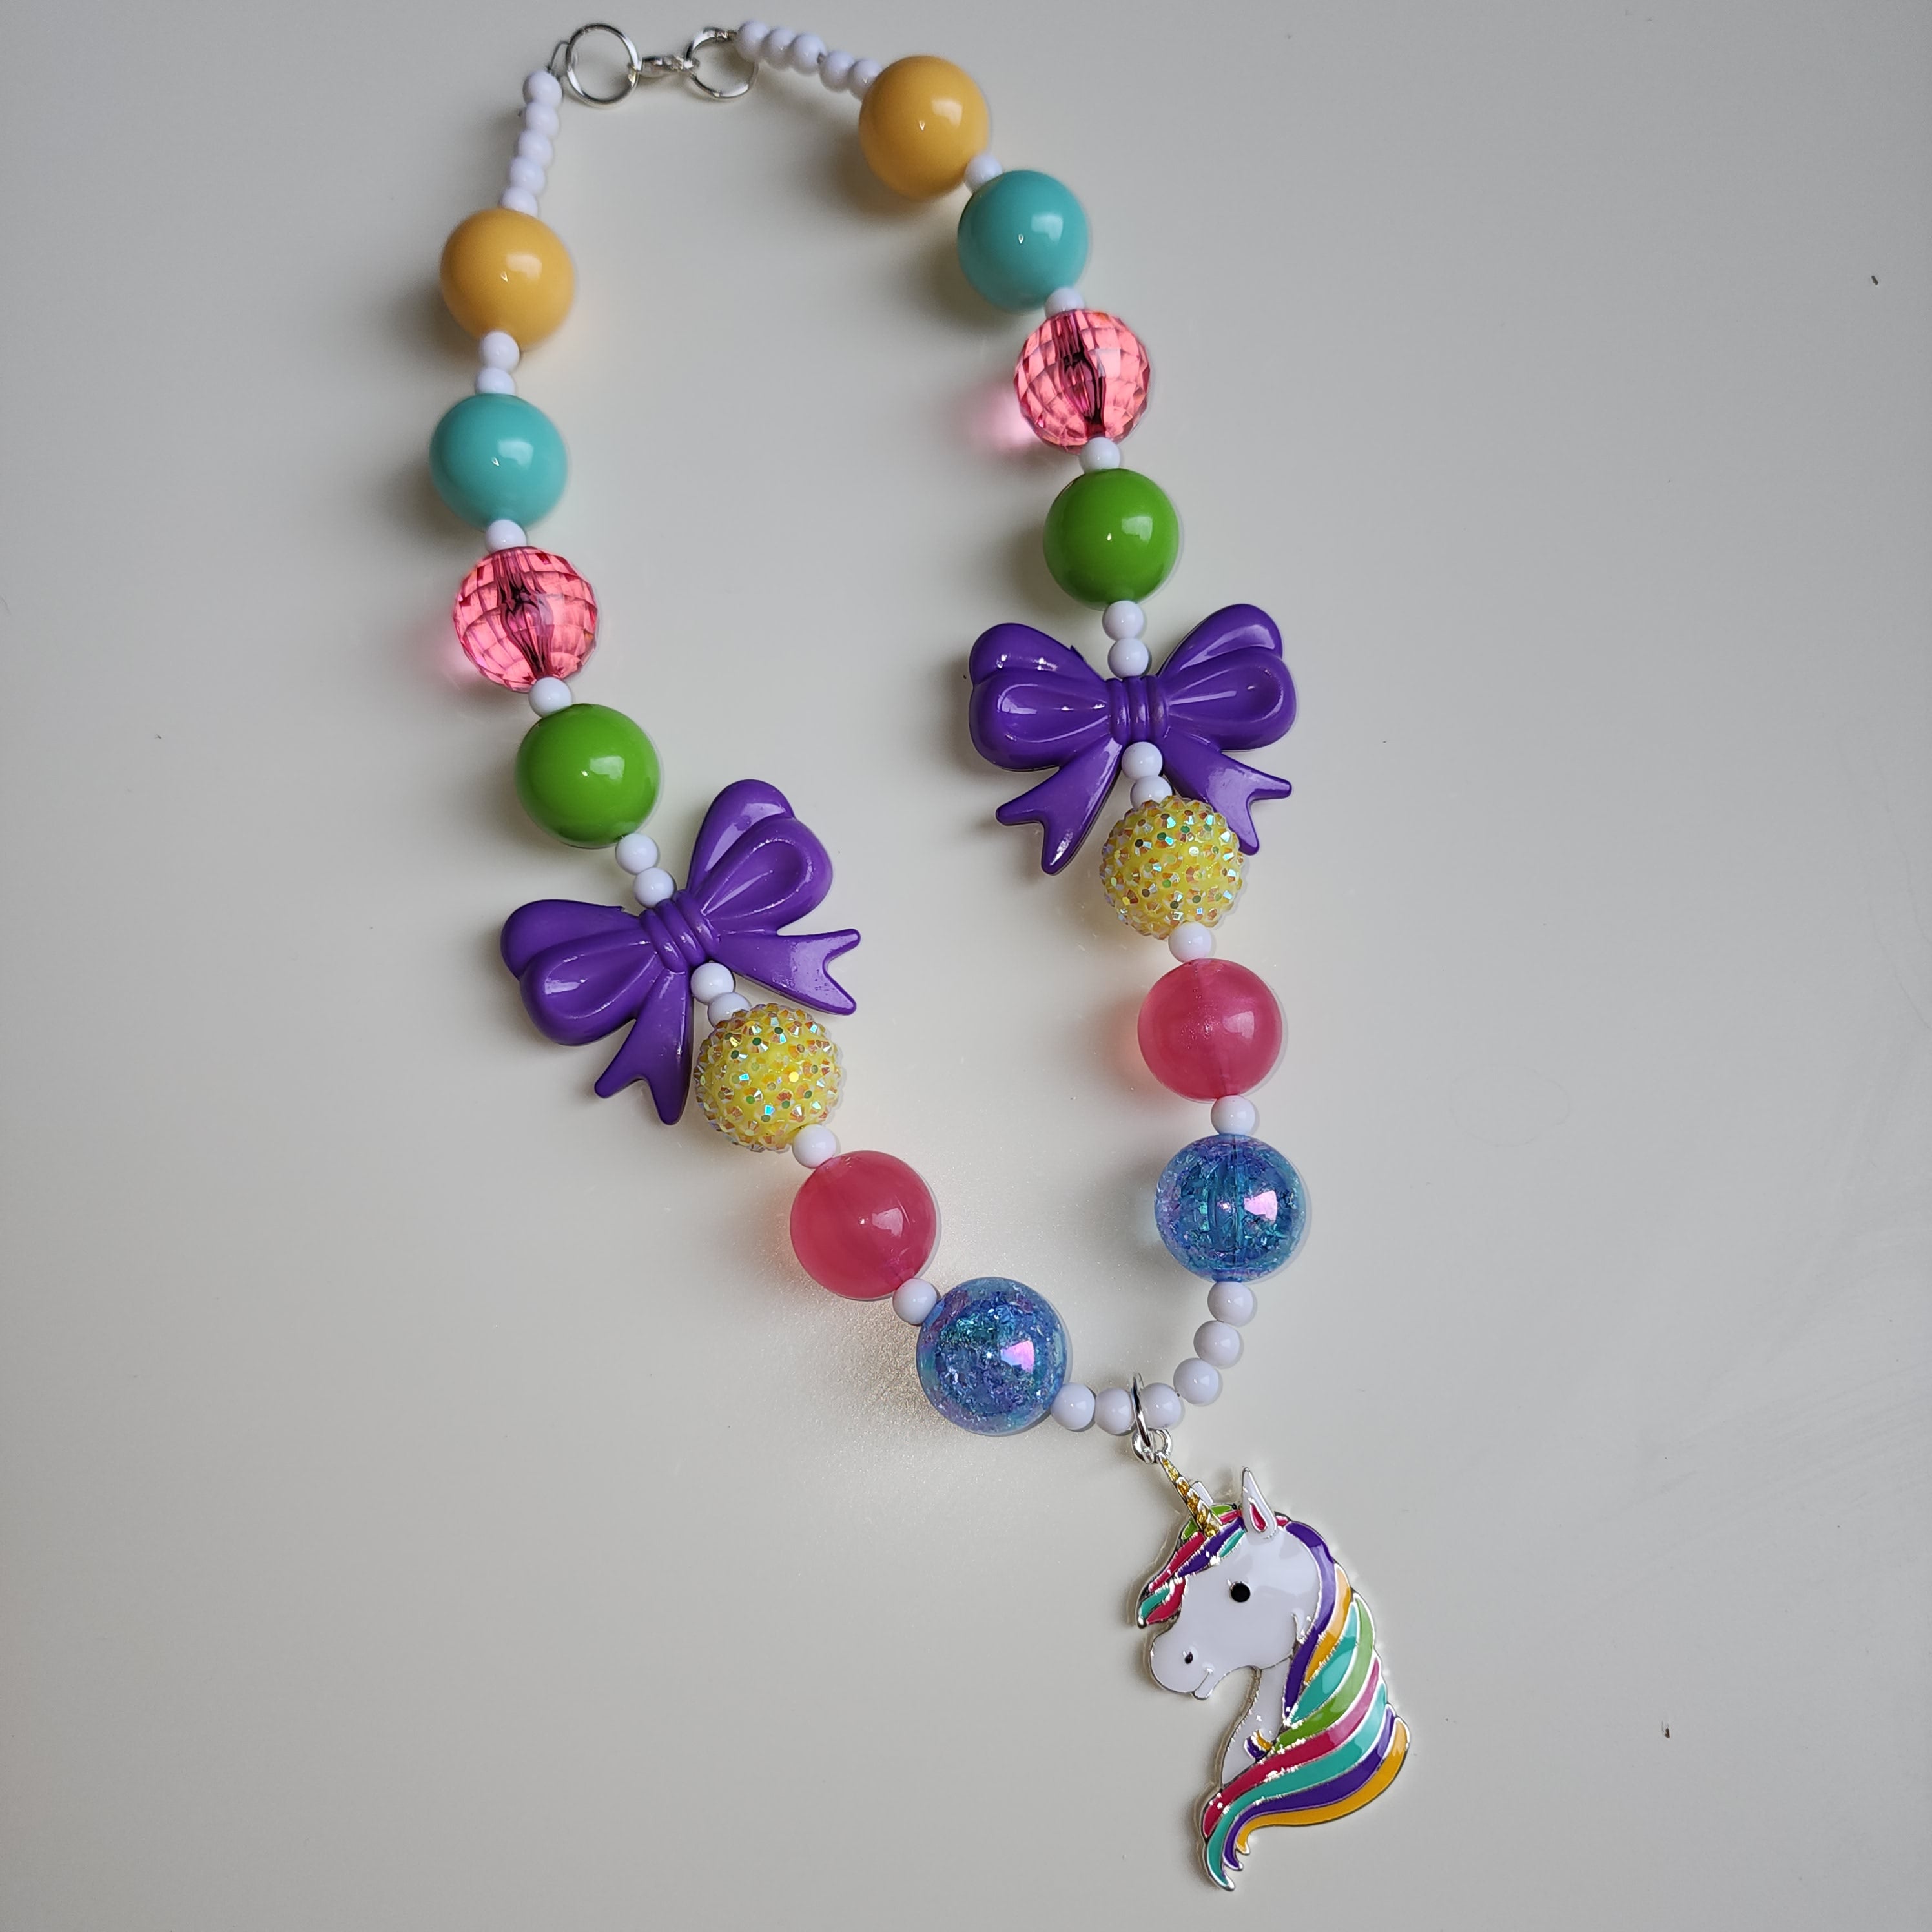 Buy Baby Girl Chunky Necklace, Rainbow Bubble Gum Necklace, Big Beads Bubblegum  Necklace, Photo Prop Necklace, Rainbow Birthday Party Cake Smash Online in  India - Etsy